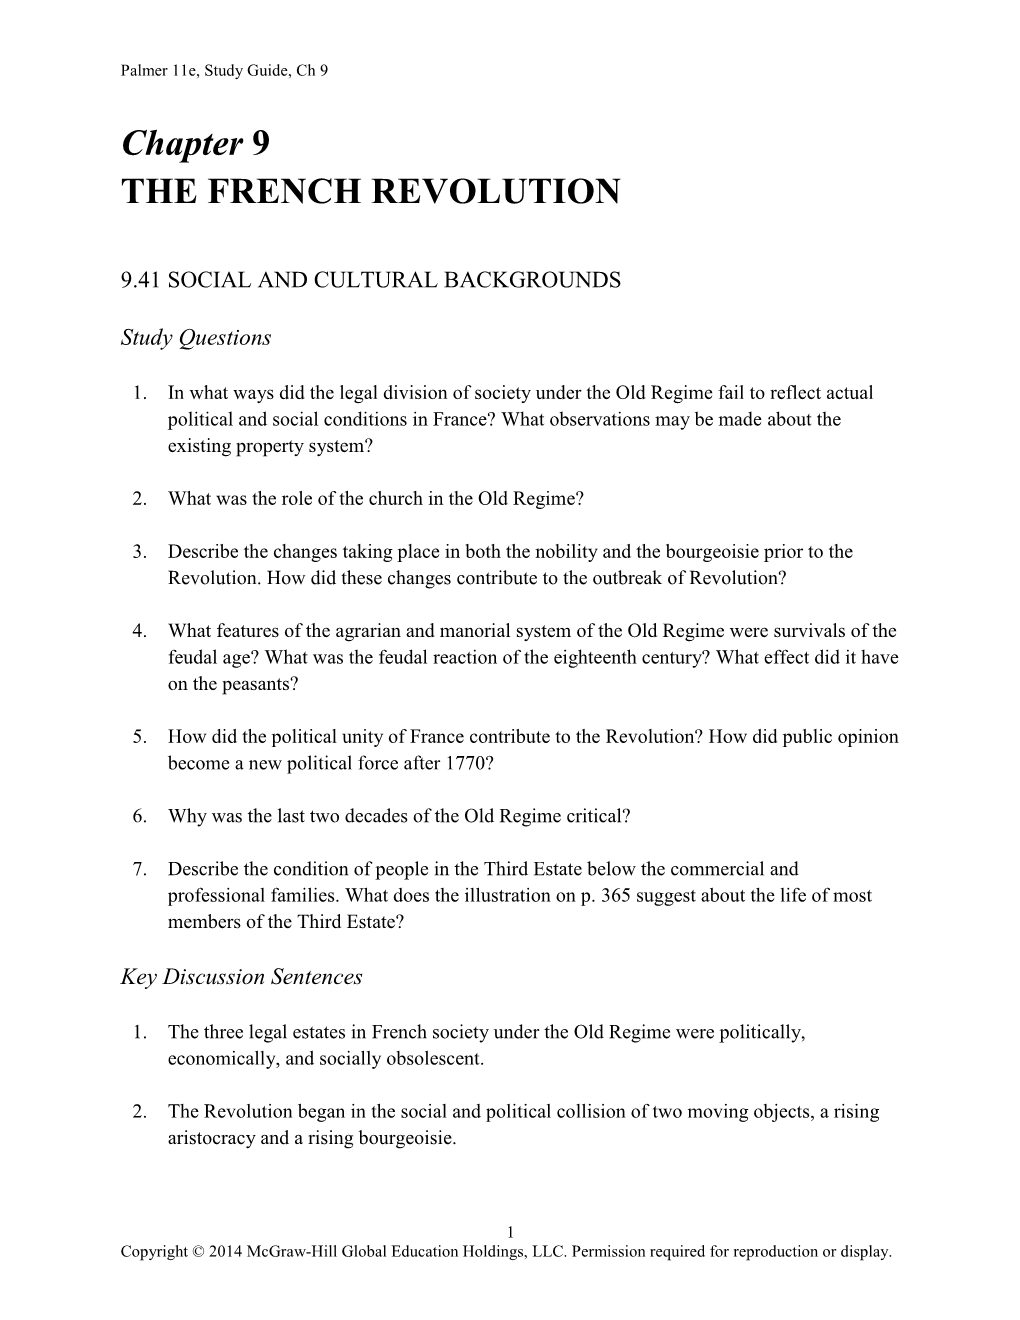 Chapter 9 the FRENCH REVOLUTION